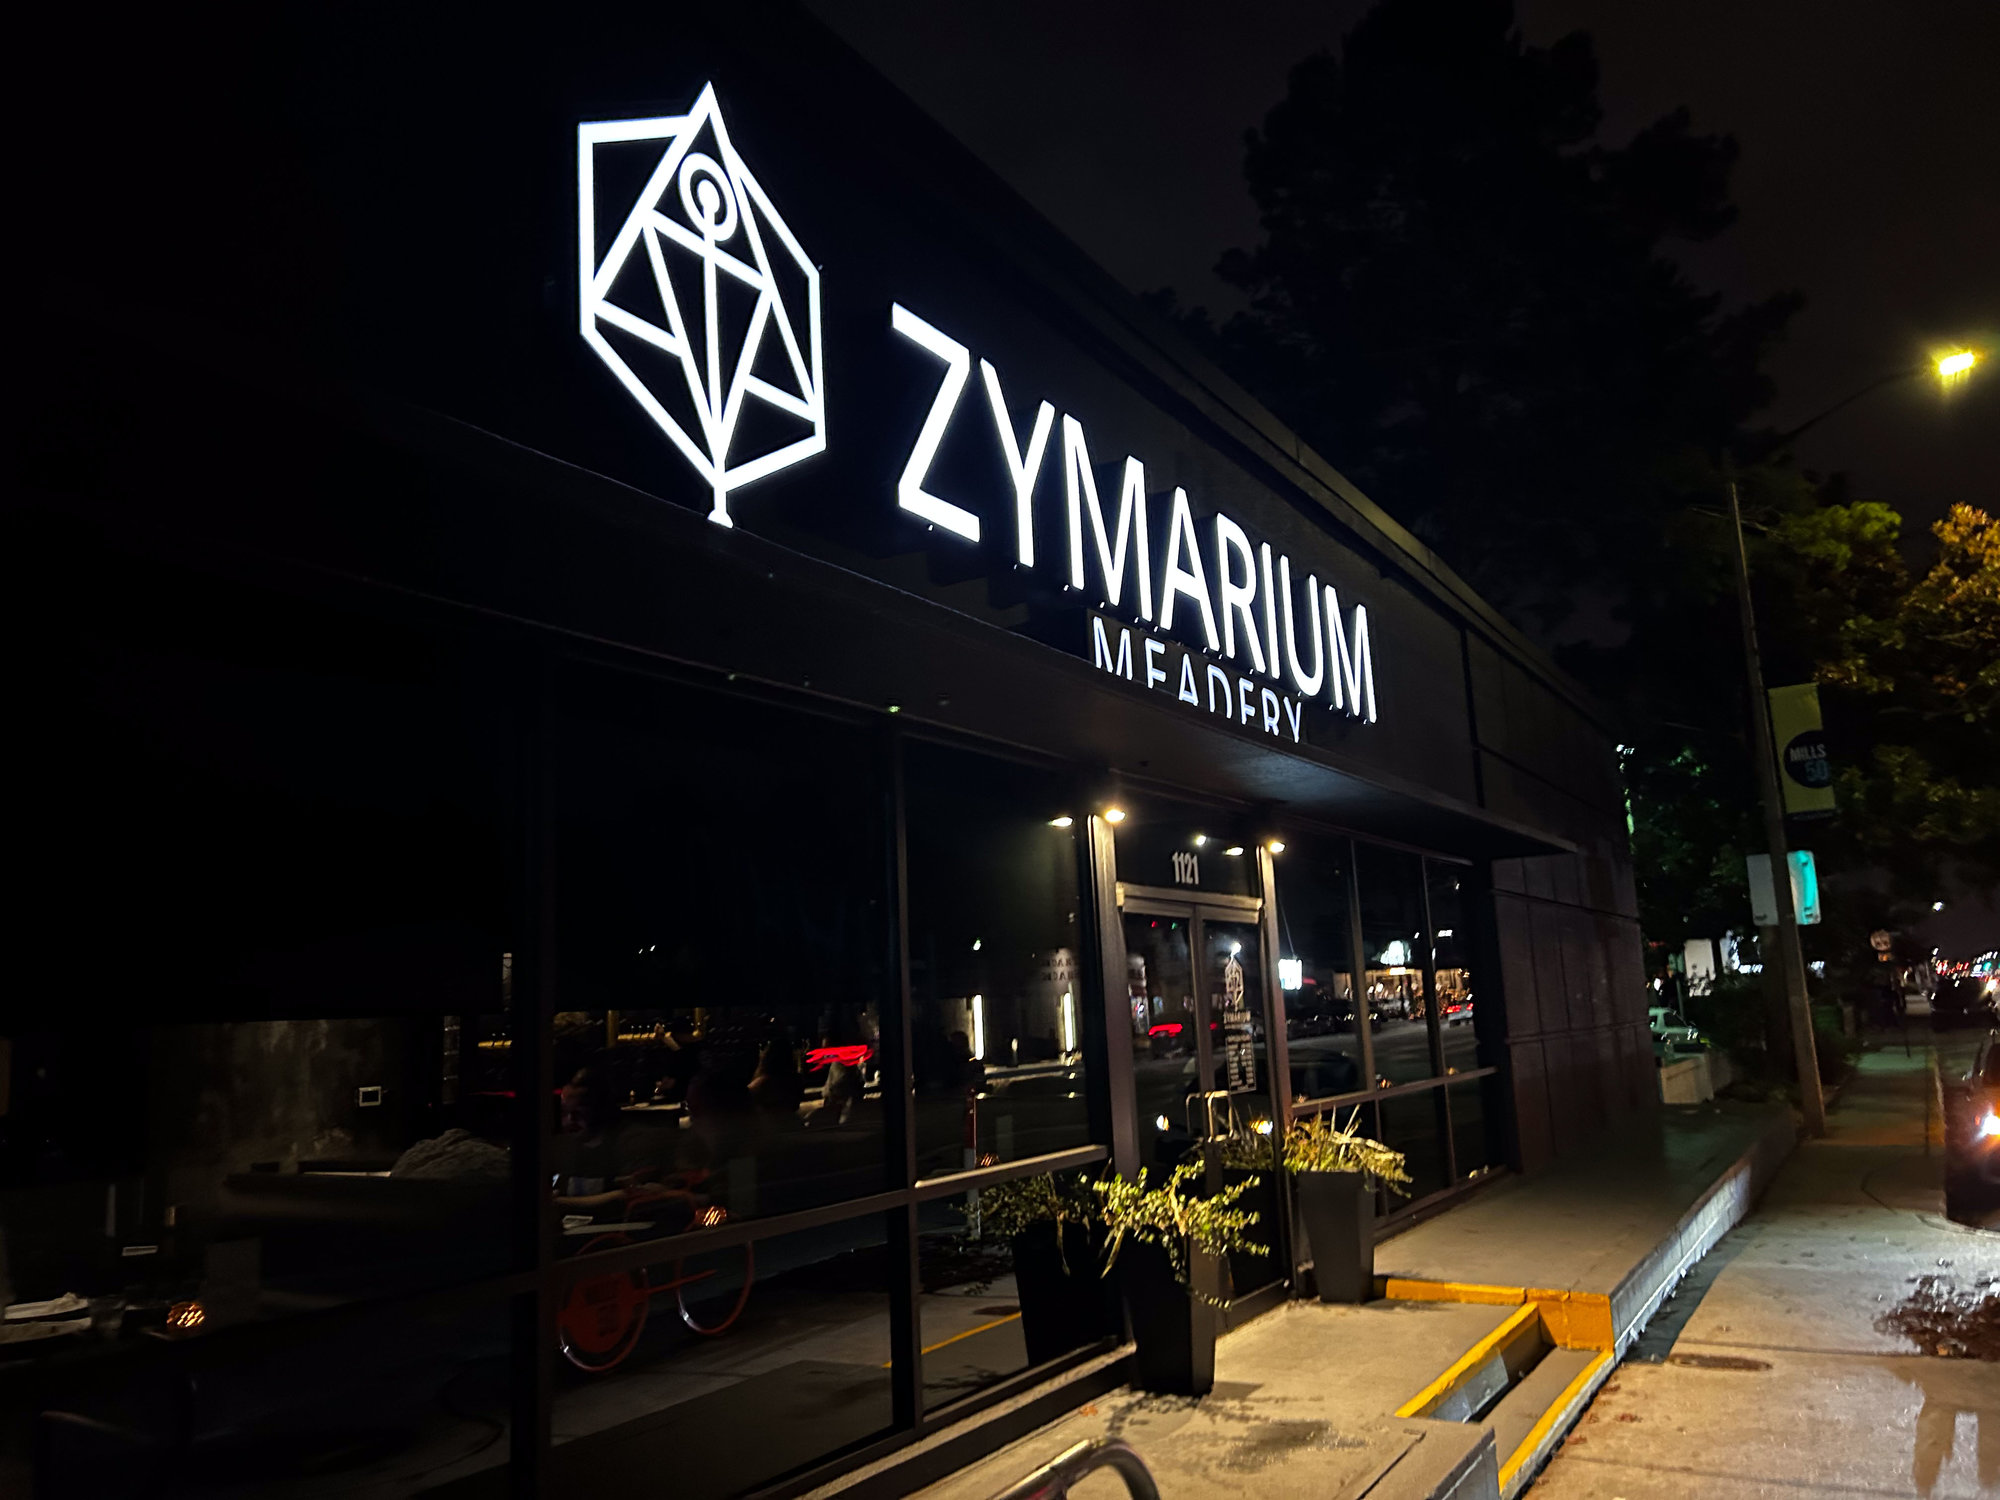 outside of zymarium meadery at night with white lit up sign